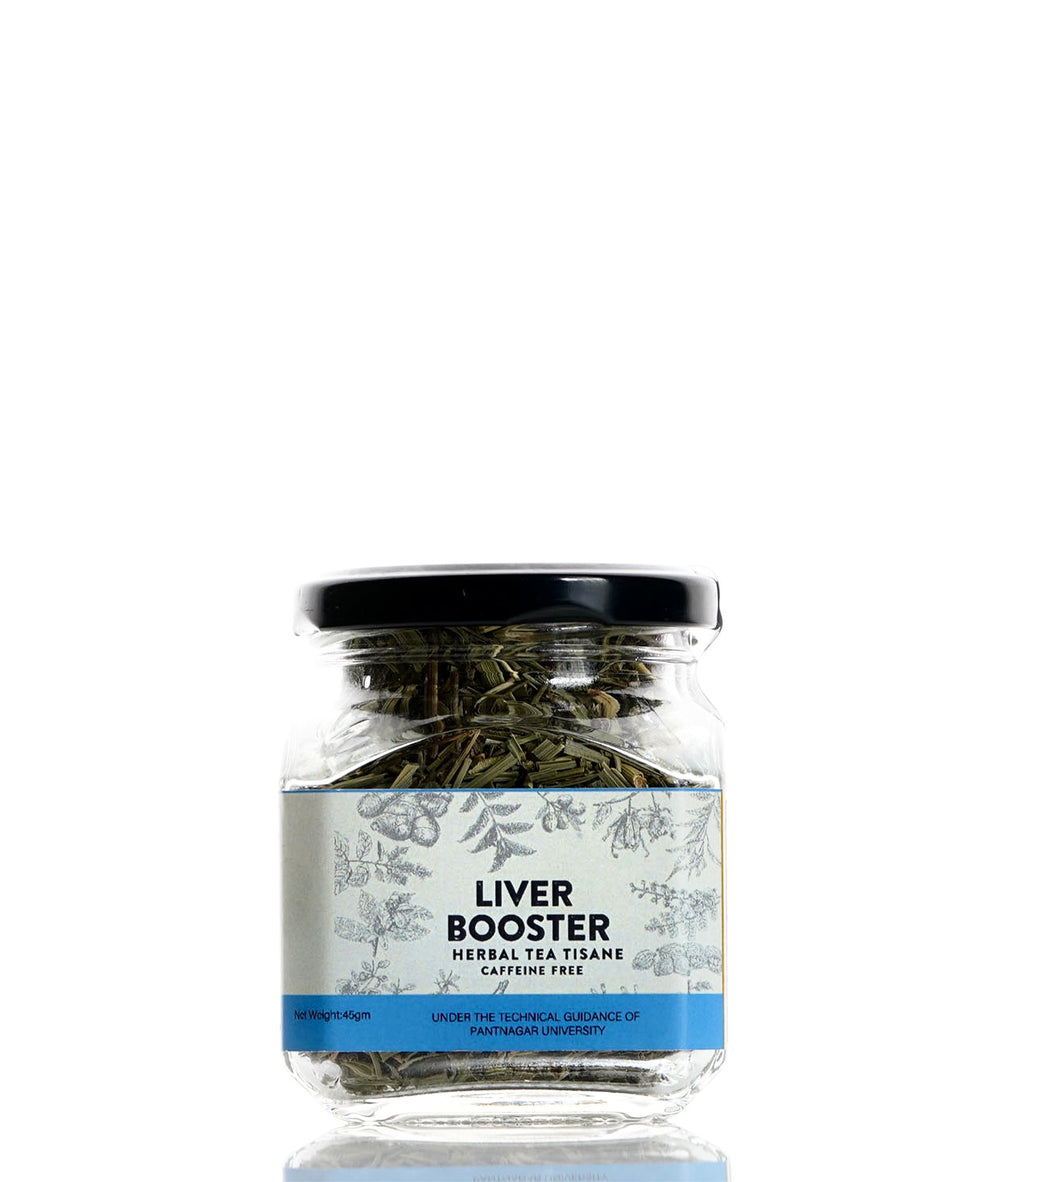 Liver booster Herbal Infusion